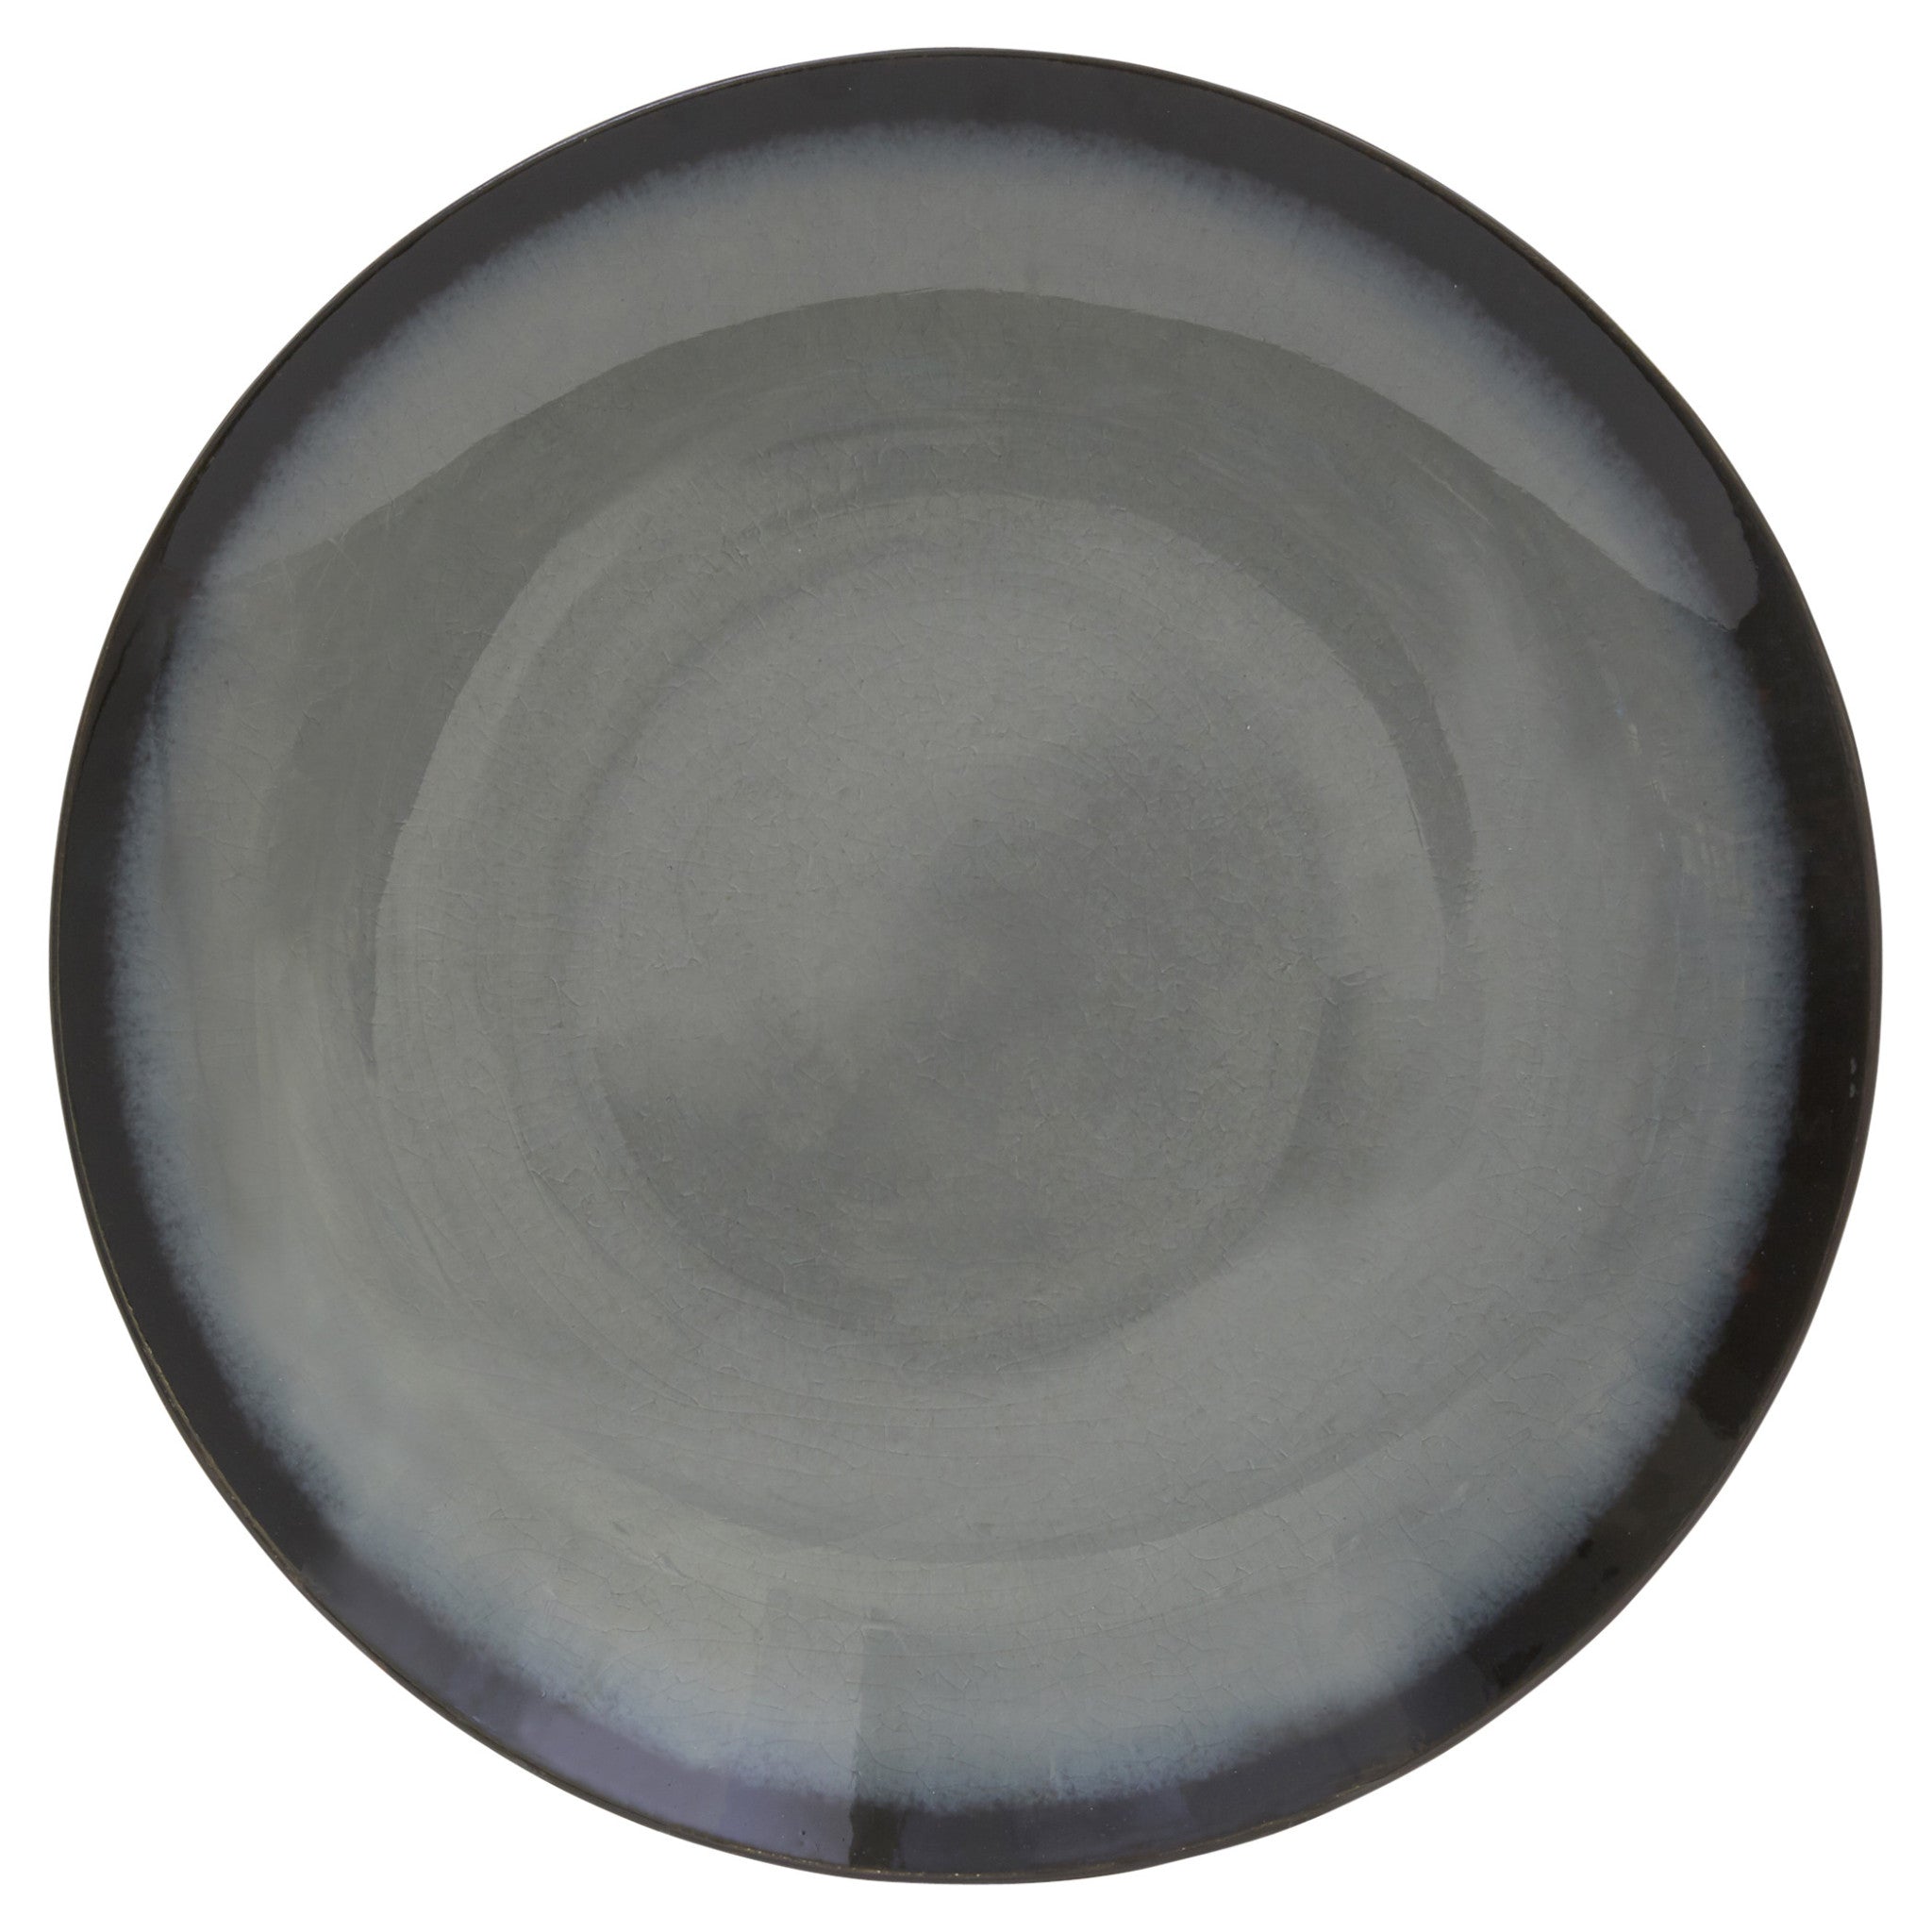 Green and Black Sixteen Piece Round Tone on Tone Ceramic Service For Four Dinnerware Set - Tuesday Morning-Dinnerware